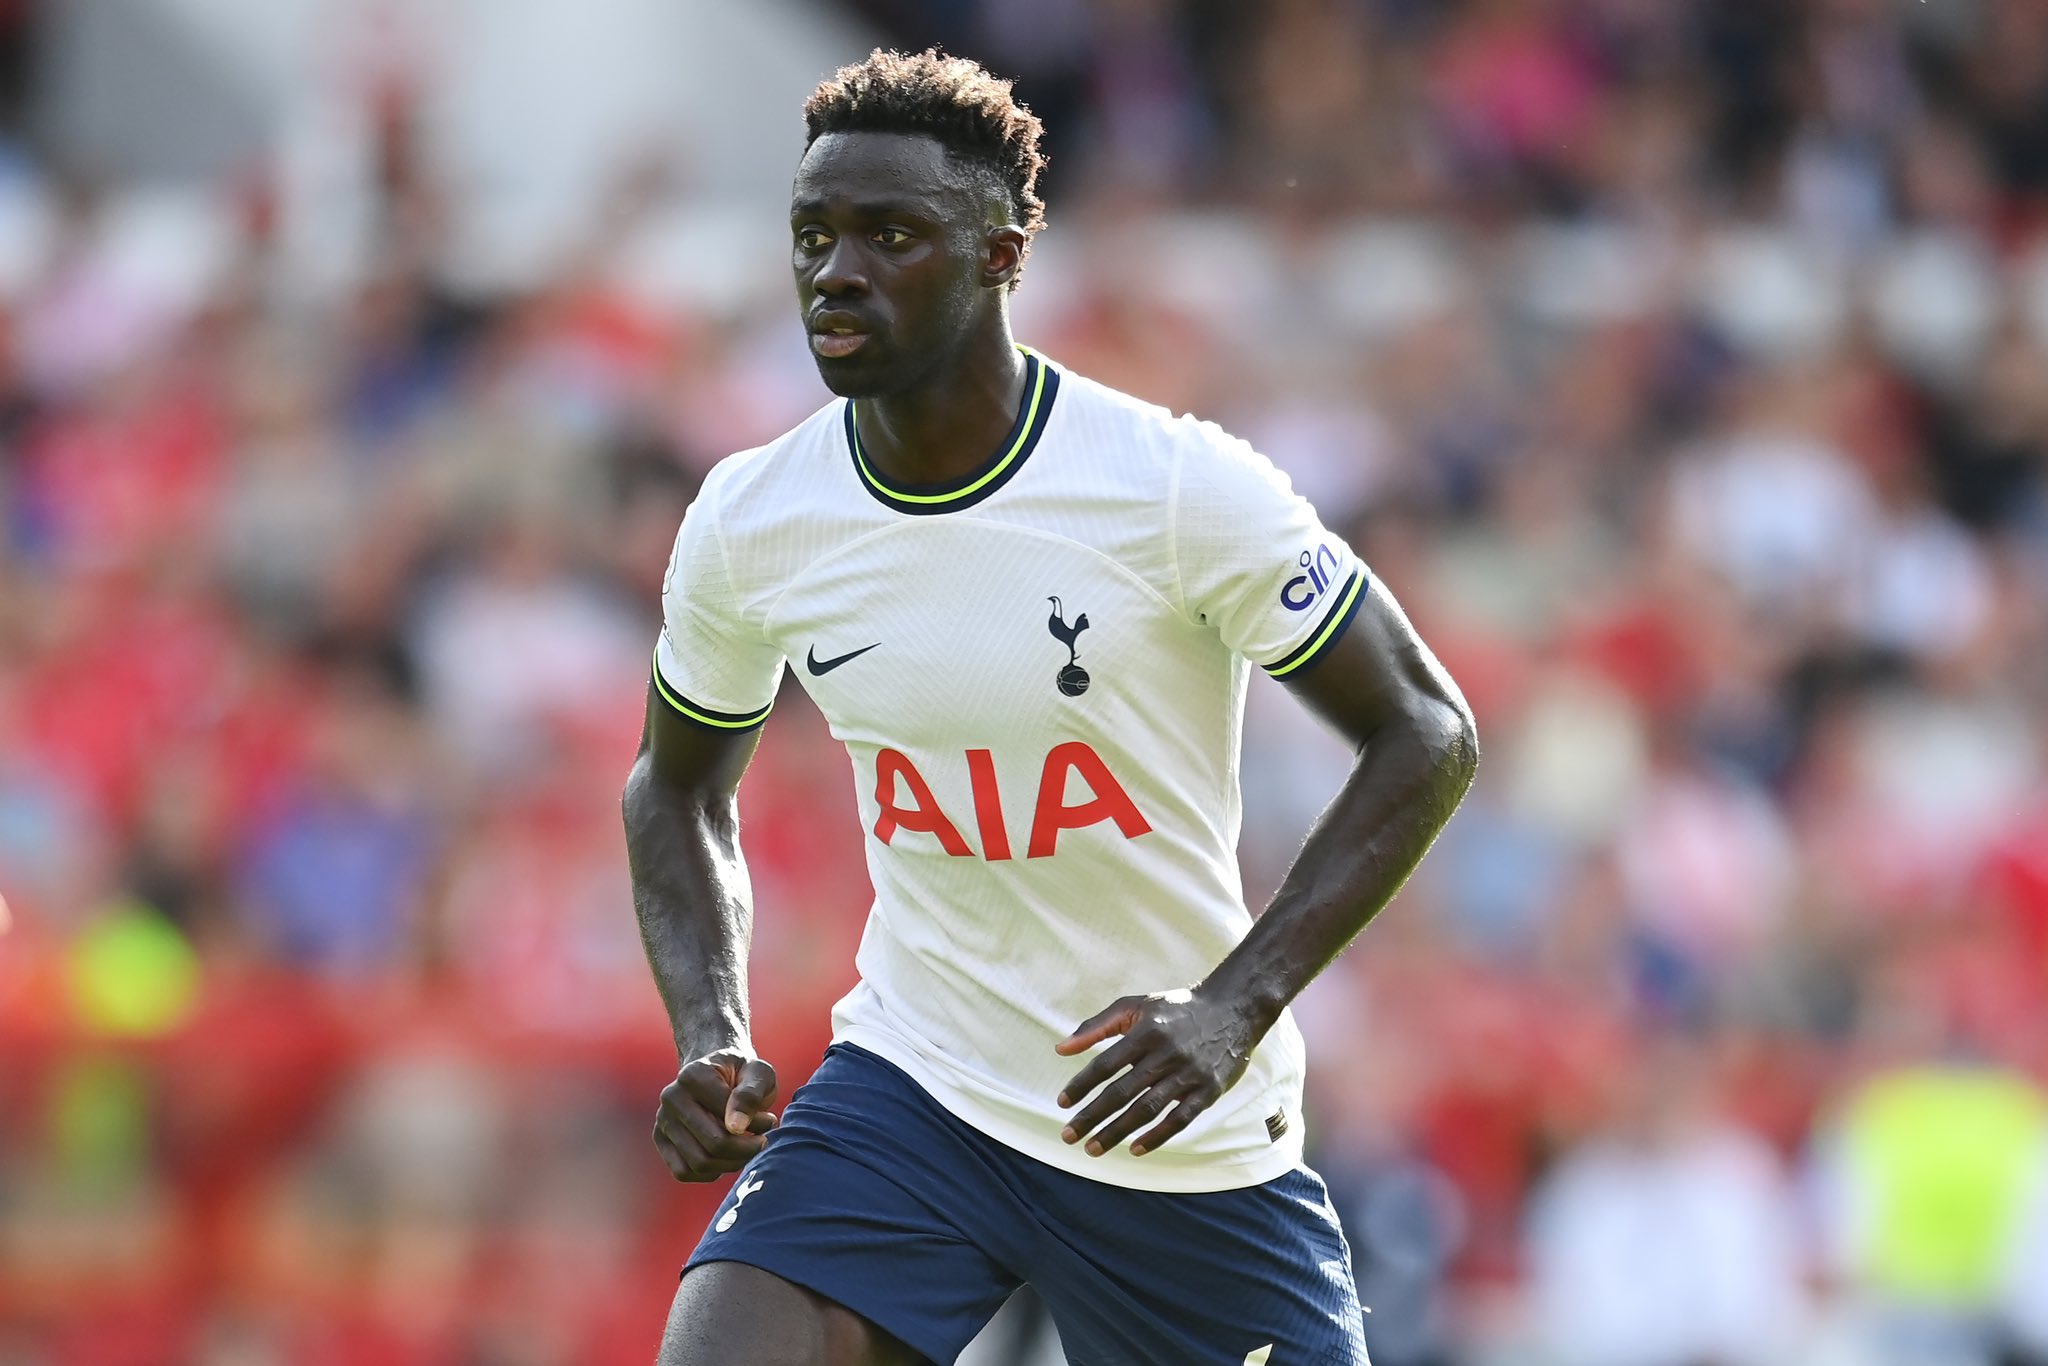 Fabrizio Romano on X: Davinson Sánchez to Galatasaray, here we go!  Agreement reached with Spurs on fee between €10/15m with add-ons included  🚨🟡🔴 #Galatasaray 📑 Understand Sánchez will sign until June 2027.